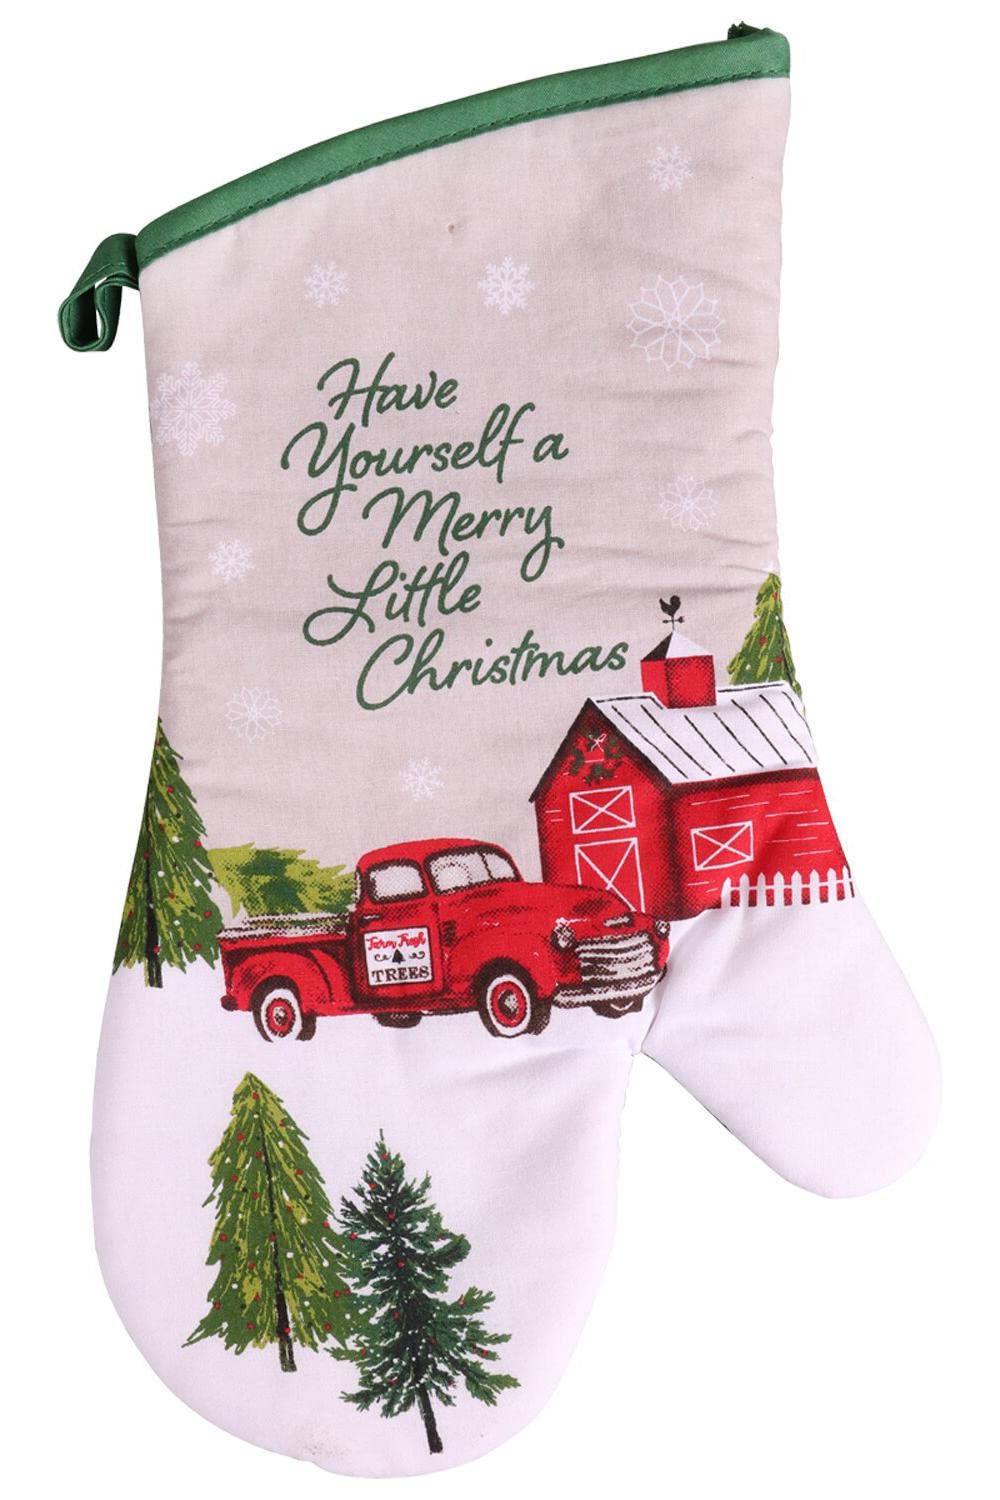 Have Yourself A Merry Little Christmas Farmhouse Vintage Red Truck Decorative Oven Mitt Potholders Kitchen Set 2 Potholders 1 Oven Mitt, Optional Christmas Cards Super Value Pack